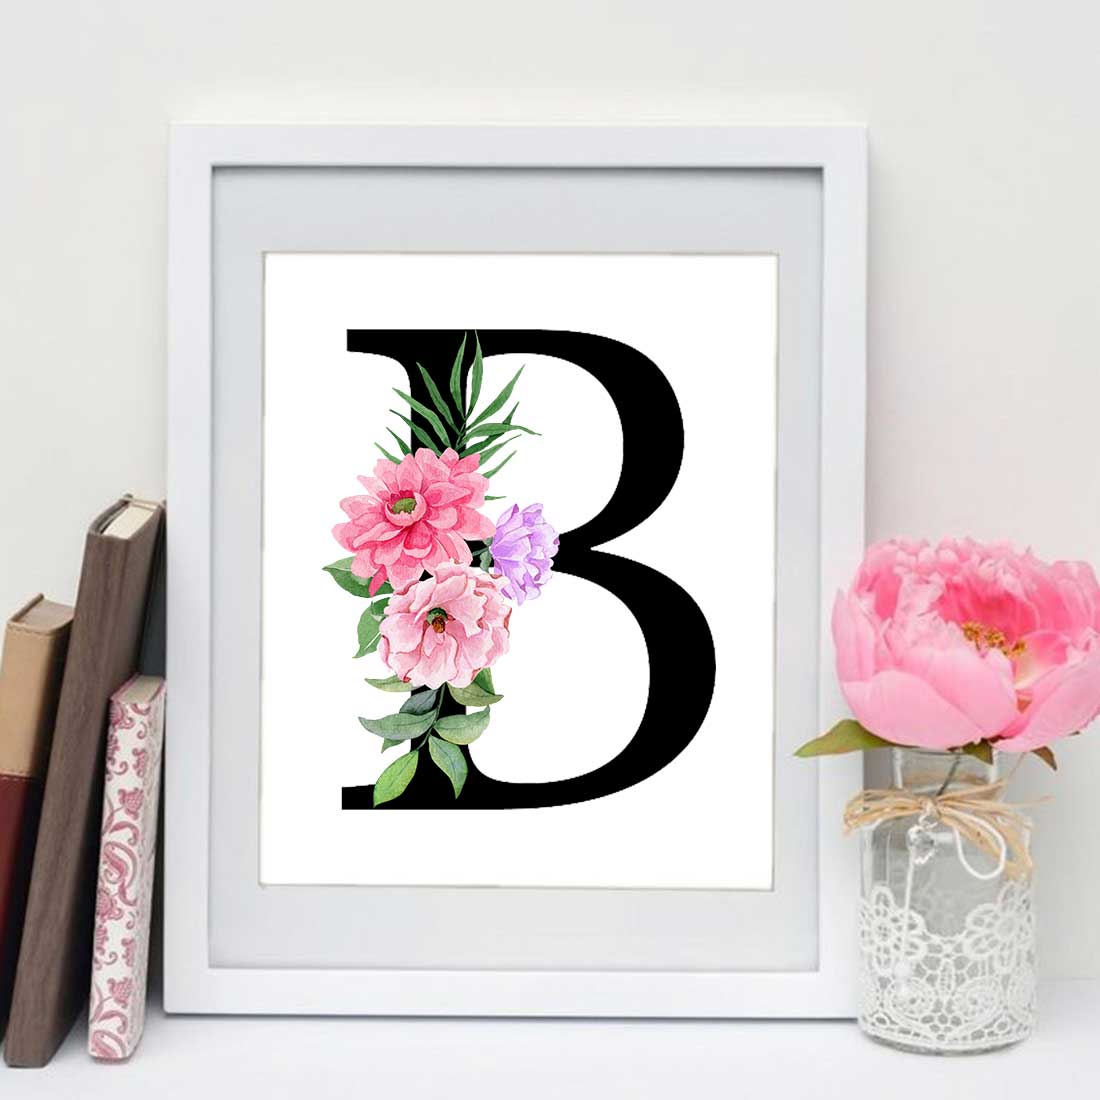 Alphabet with Watercolor Flowers, Letters, Monogram, Numbers, letter b design.